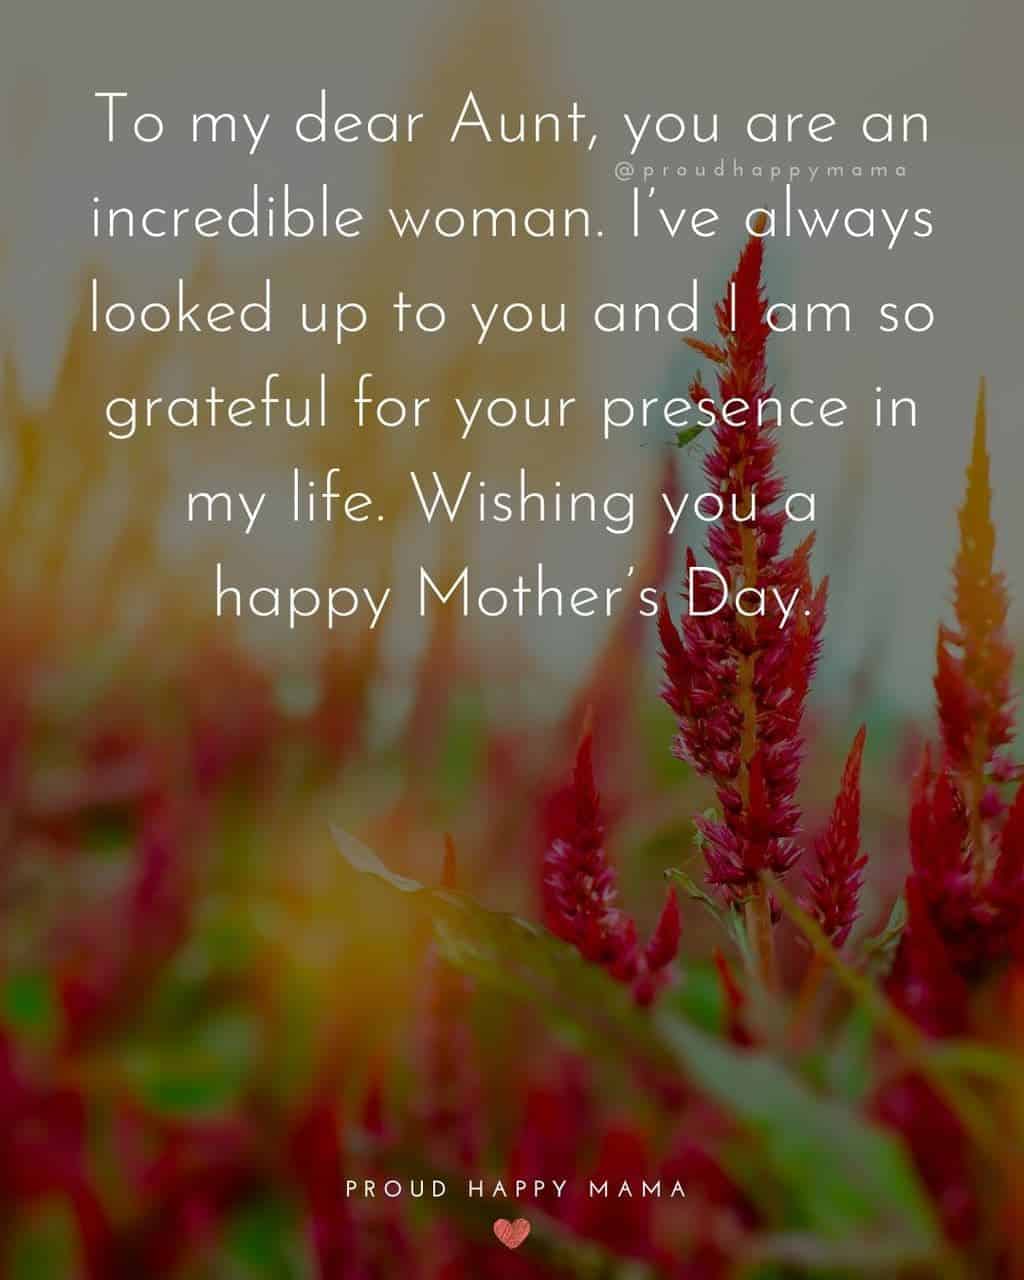 Happy Mothers Day Aunt - To my dear Aunt, you are an incredible woman. Ive always looked up to you and I am so grateful for your presence in my life. Wishing you a happy Mothers Day.